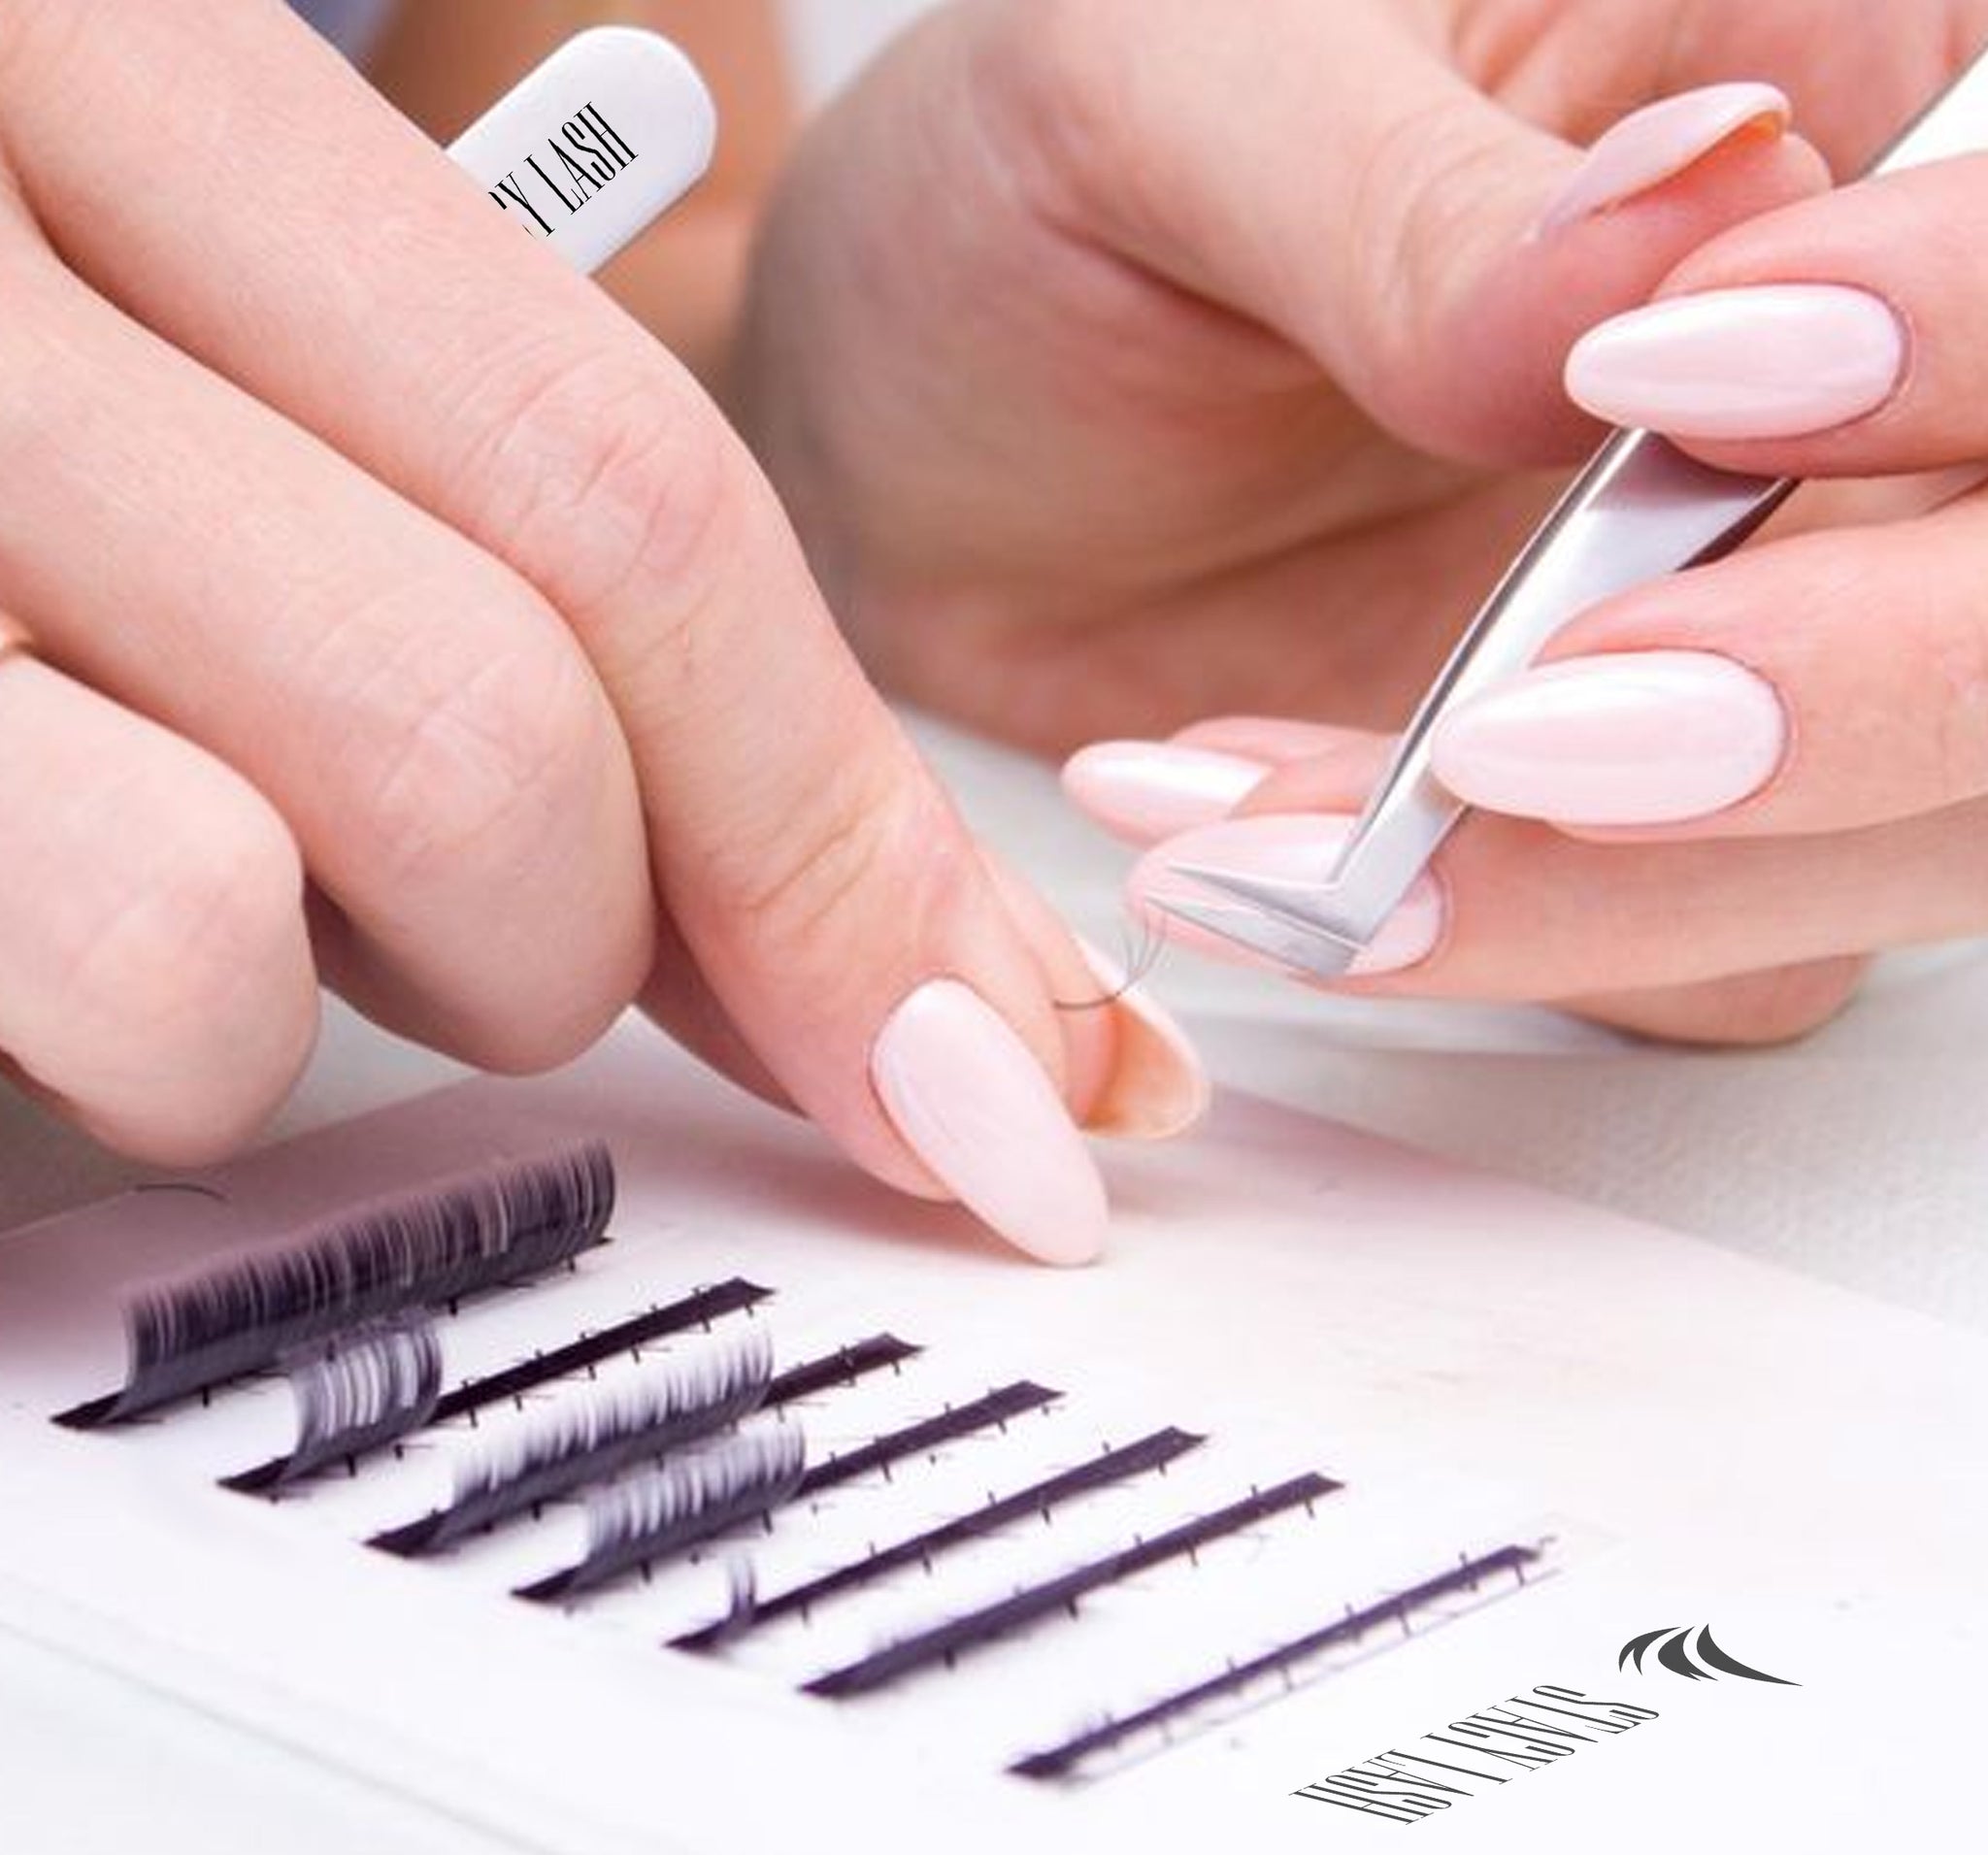 The Vital Role of Certifications and Continued Education in the Lash Industry